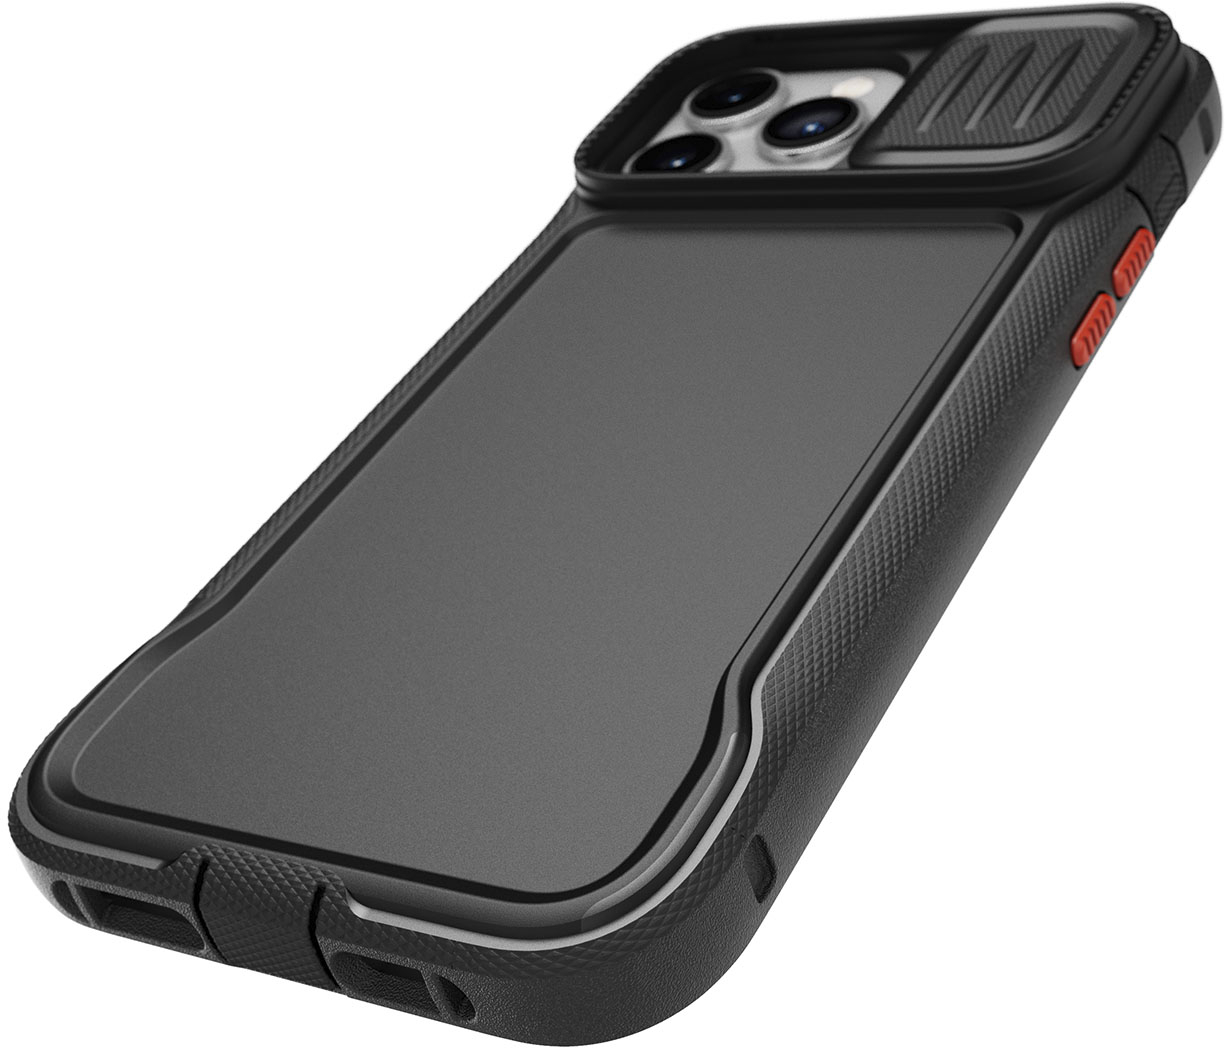 iPhone 12 Pro Max Cases (Exclusive Launch) –